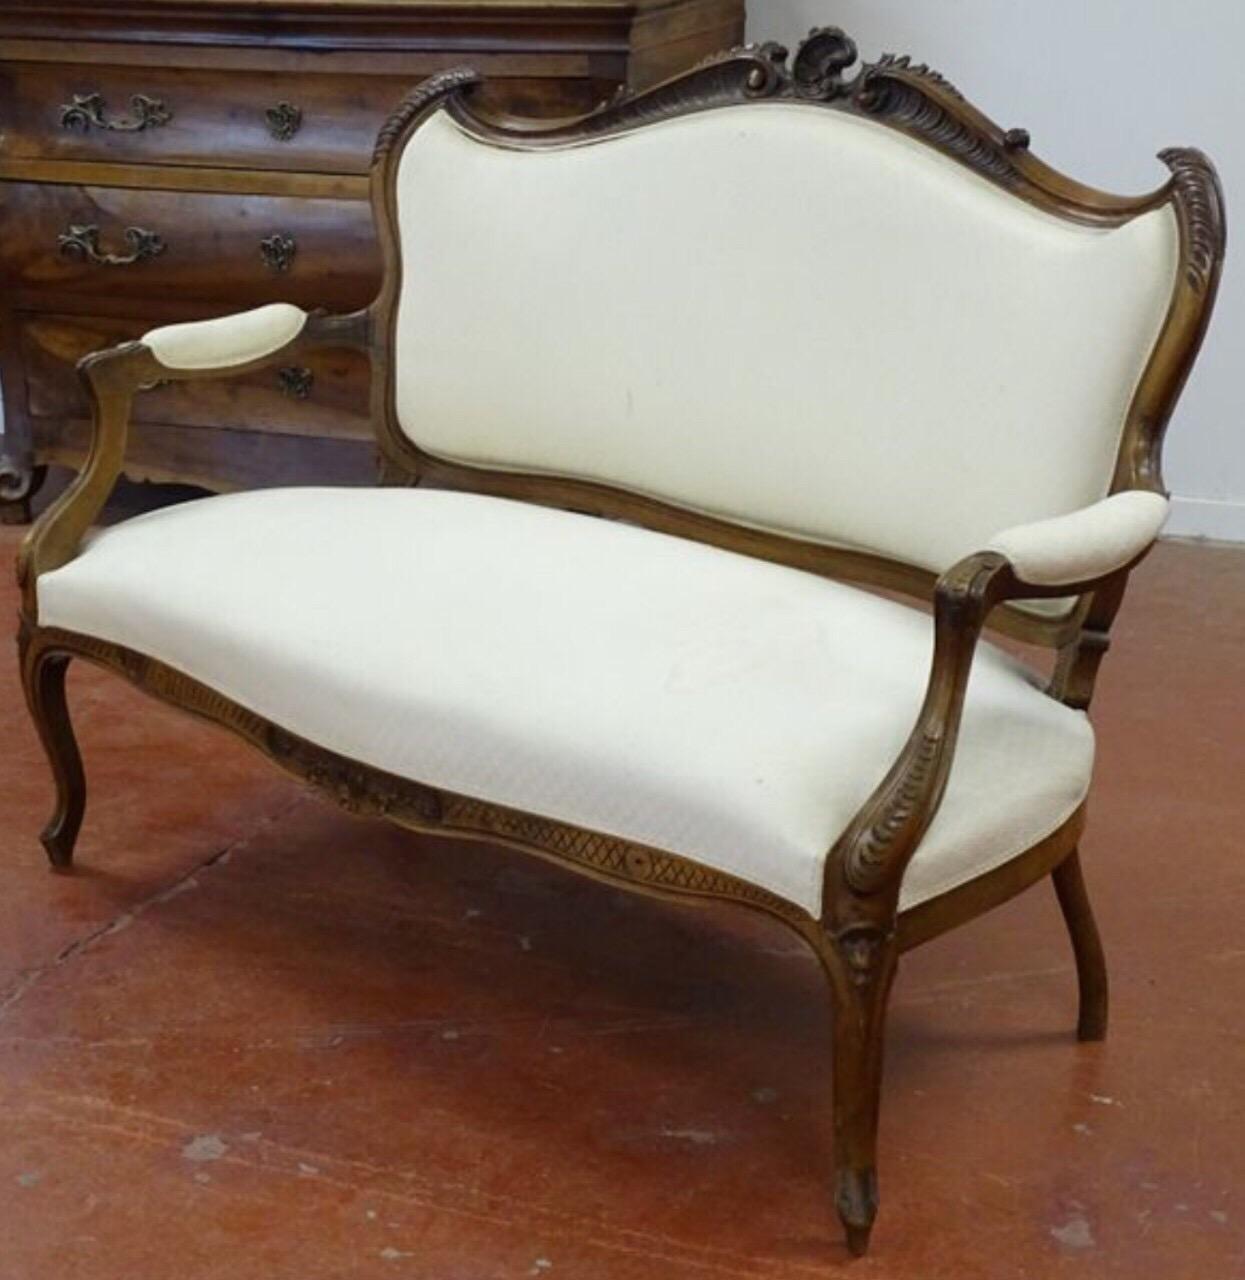 Hand carved walnut canapé in Louis XV style in white silk upholstery. Very elegant legs and beautiful shape.
France, circa 1880.
   